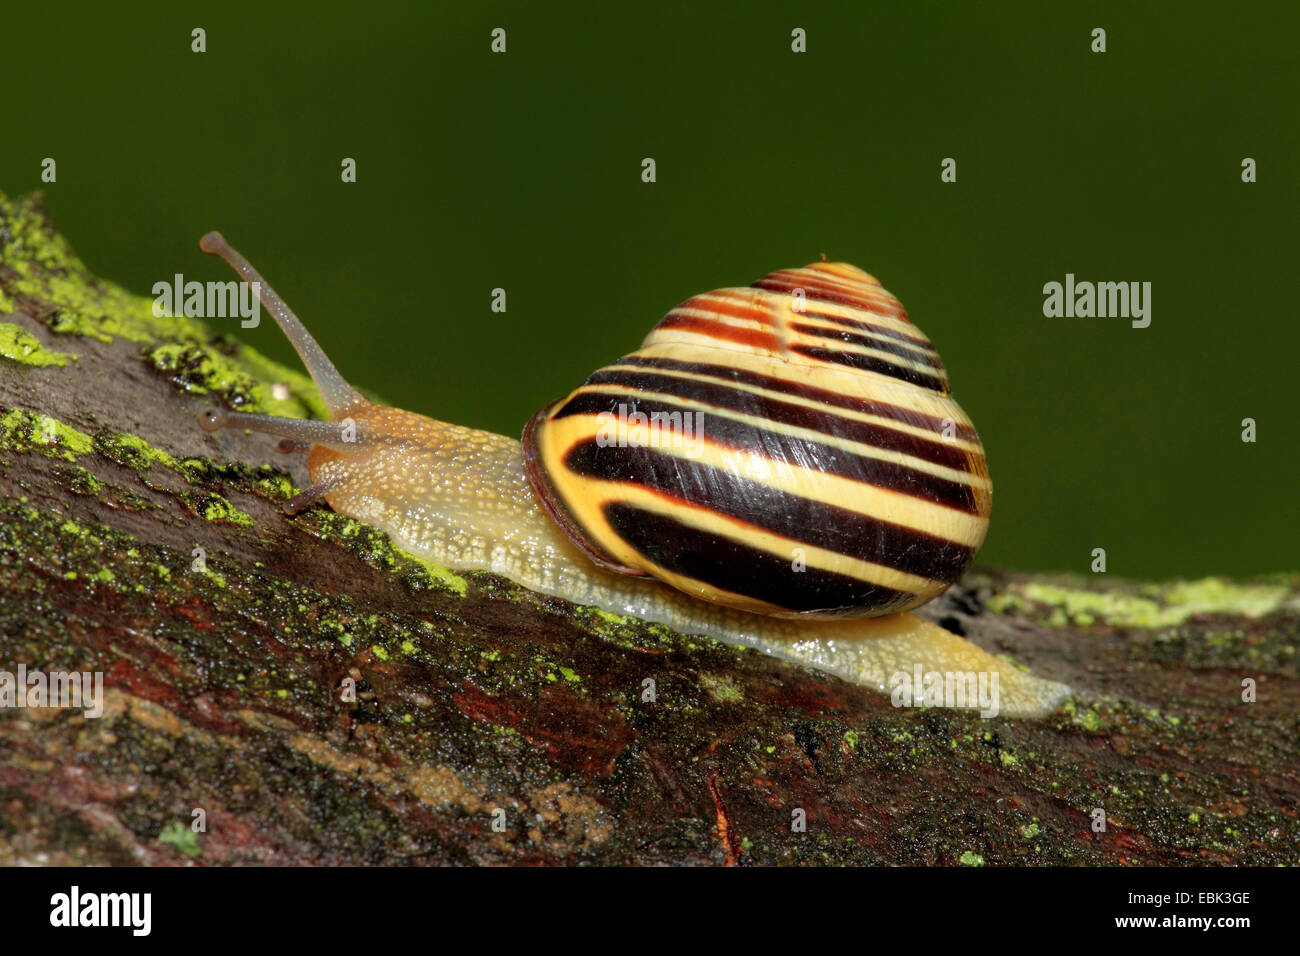 brown-lipped snail, grove snail, grovesnail, English garden snail, larger banded snail, banded wood snail (Cepaea nemoralis), creeping on lichened wood, Germany Stock Photo